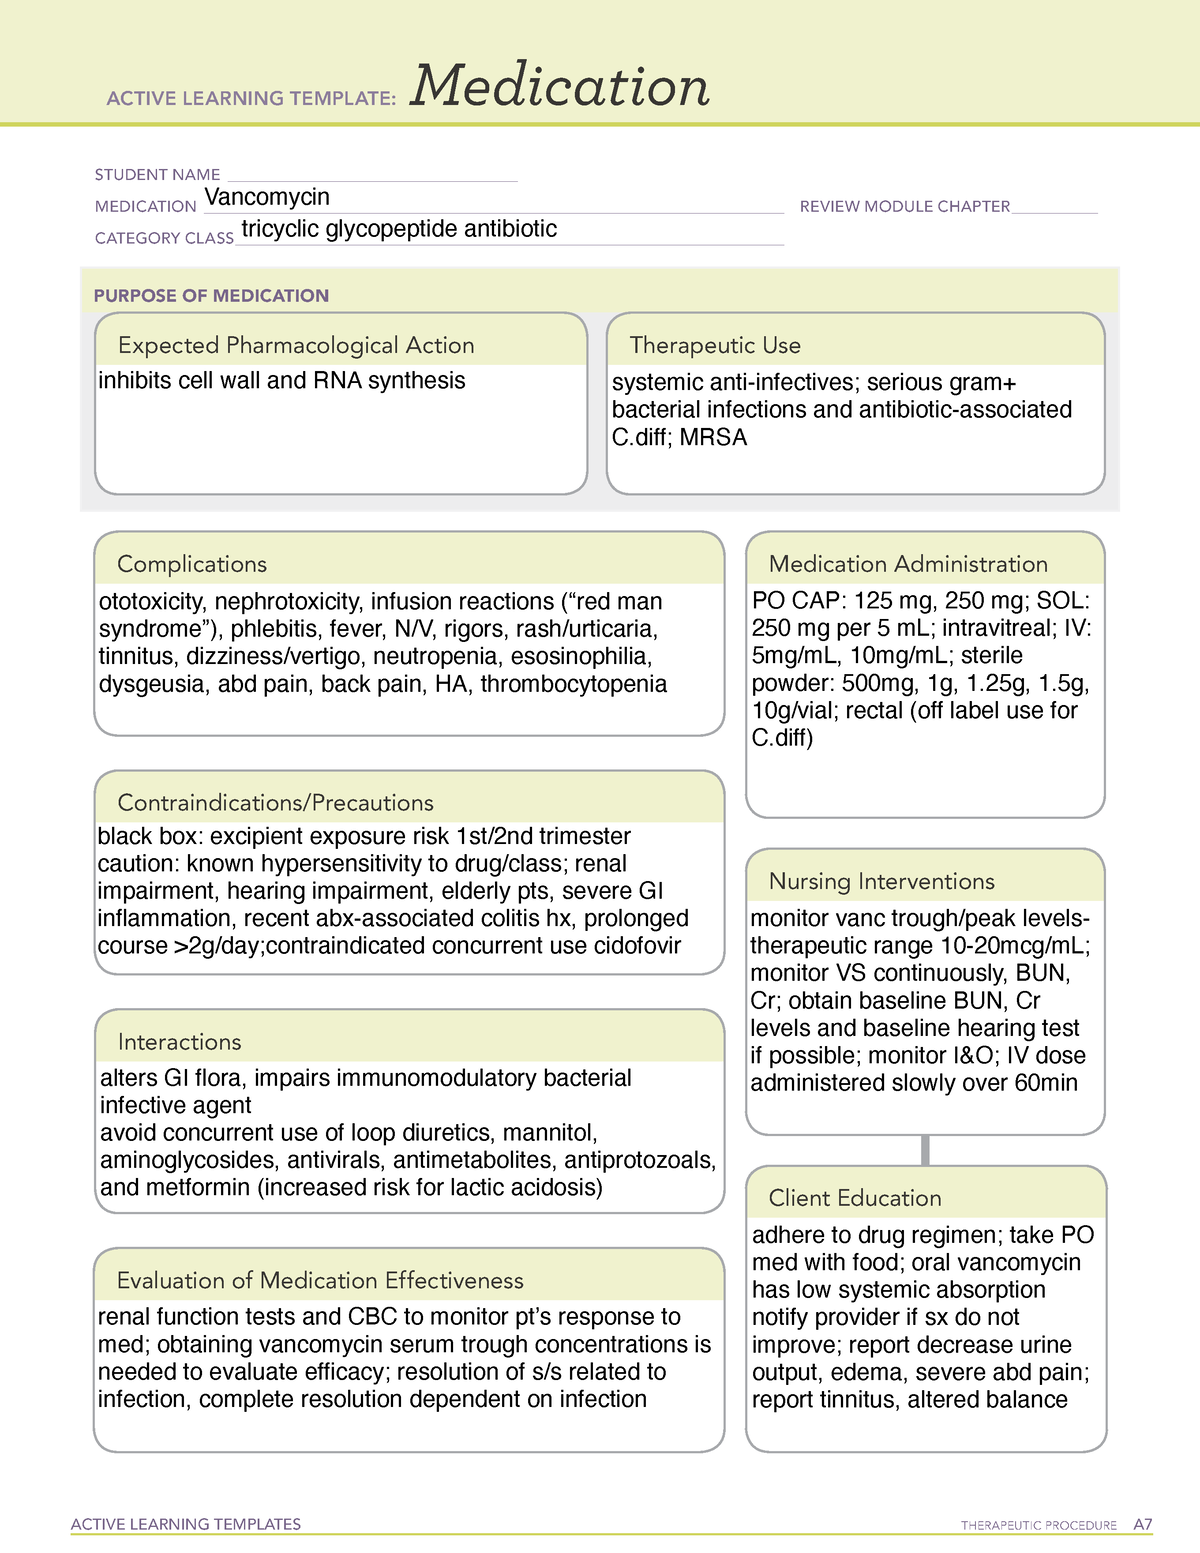 active-learning-template-medication-vancomycin-active-learning